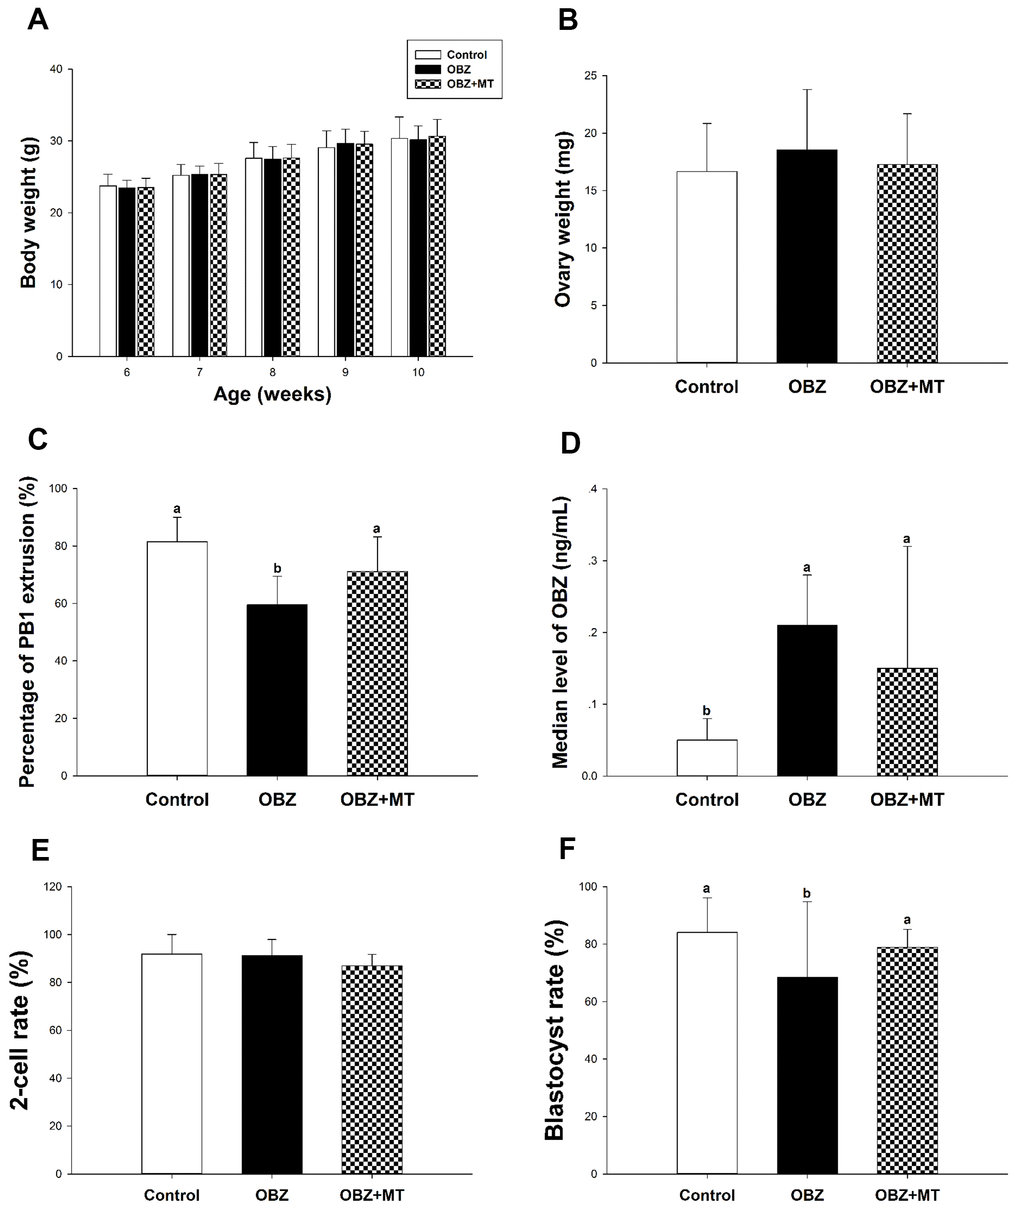 Effects of melatonin on body weight, ovary weight, the rate of PBE, the concentration of OBZ, and embryo development from OBZ-exposed mice in vivo. All parameters were measured throughout the experimental period (6–10 weeks). (A–F) Body weight (A), ovary weight (B), extrusion rate of PB1 (C), concentrations of OBZ (D), and embryo development rate (E, F) from the 2-cell stage to blastocyst stage in each treatment group. Values indicated by different letters are significantly different (P 